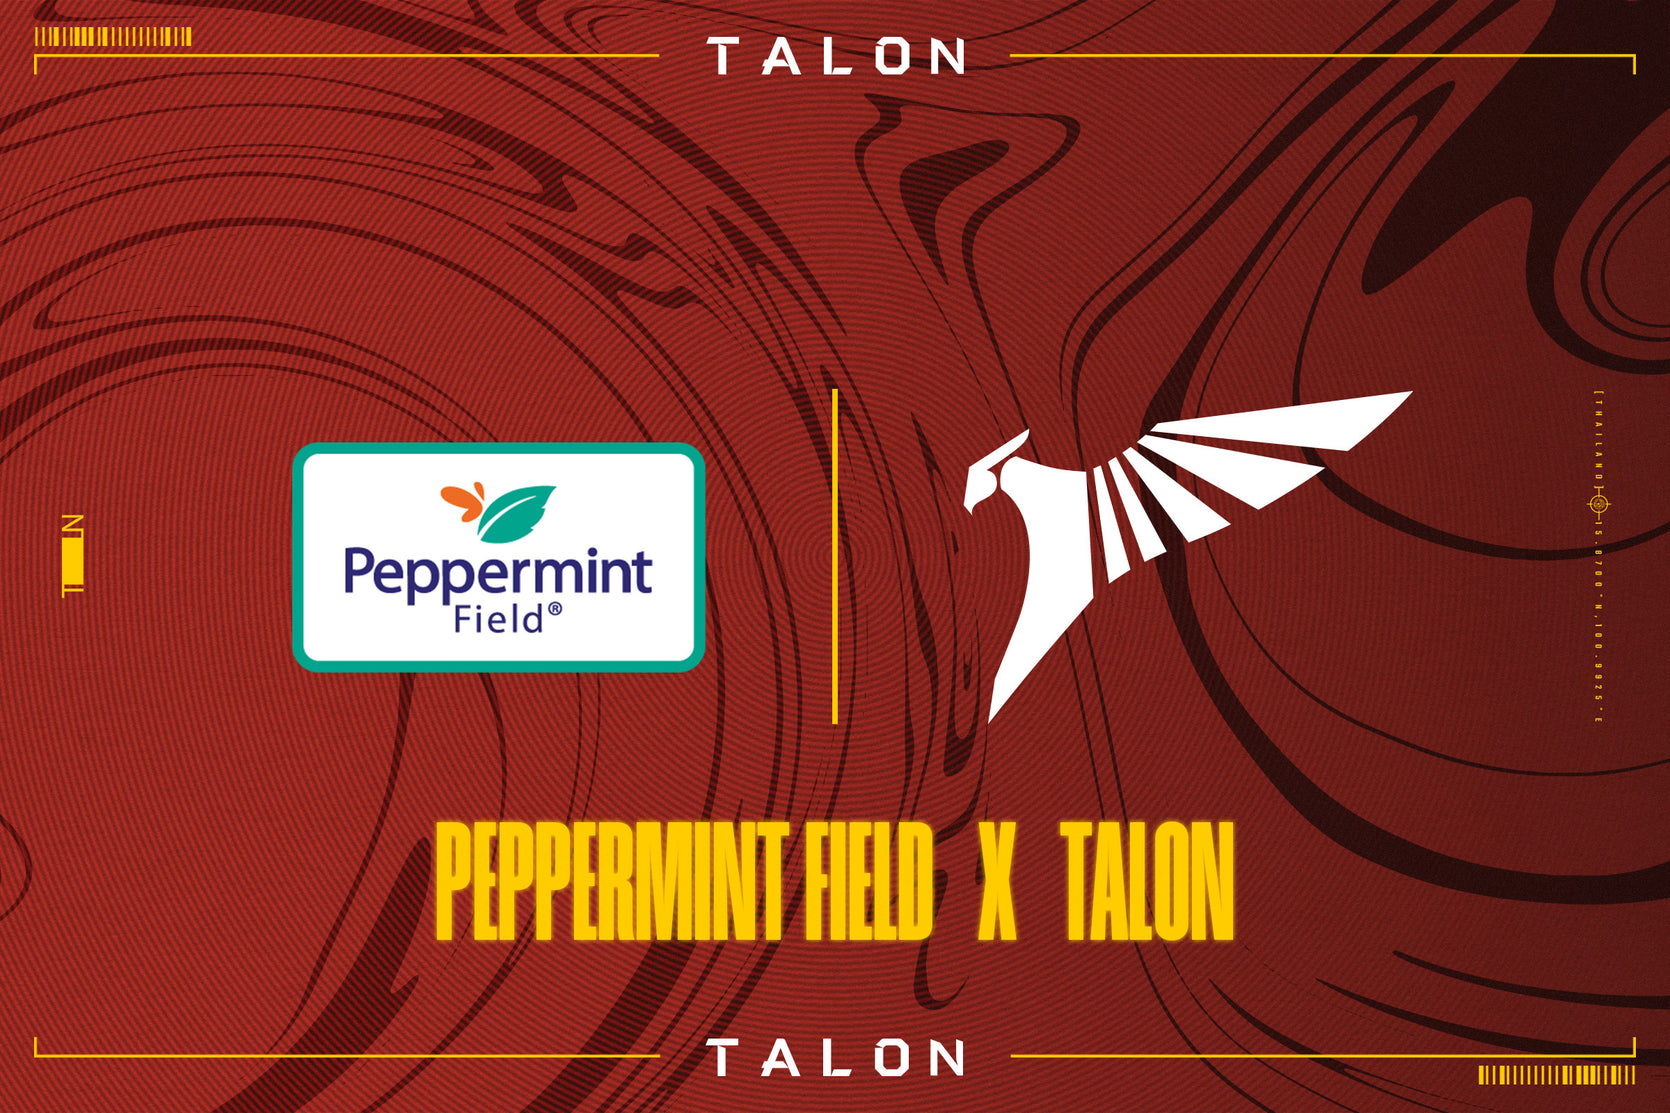 TALON PARTNERS WITH PEPPERMINT FIELD FOR ARENA OF VALOR (ROV) SEASON